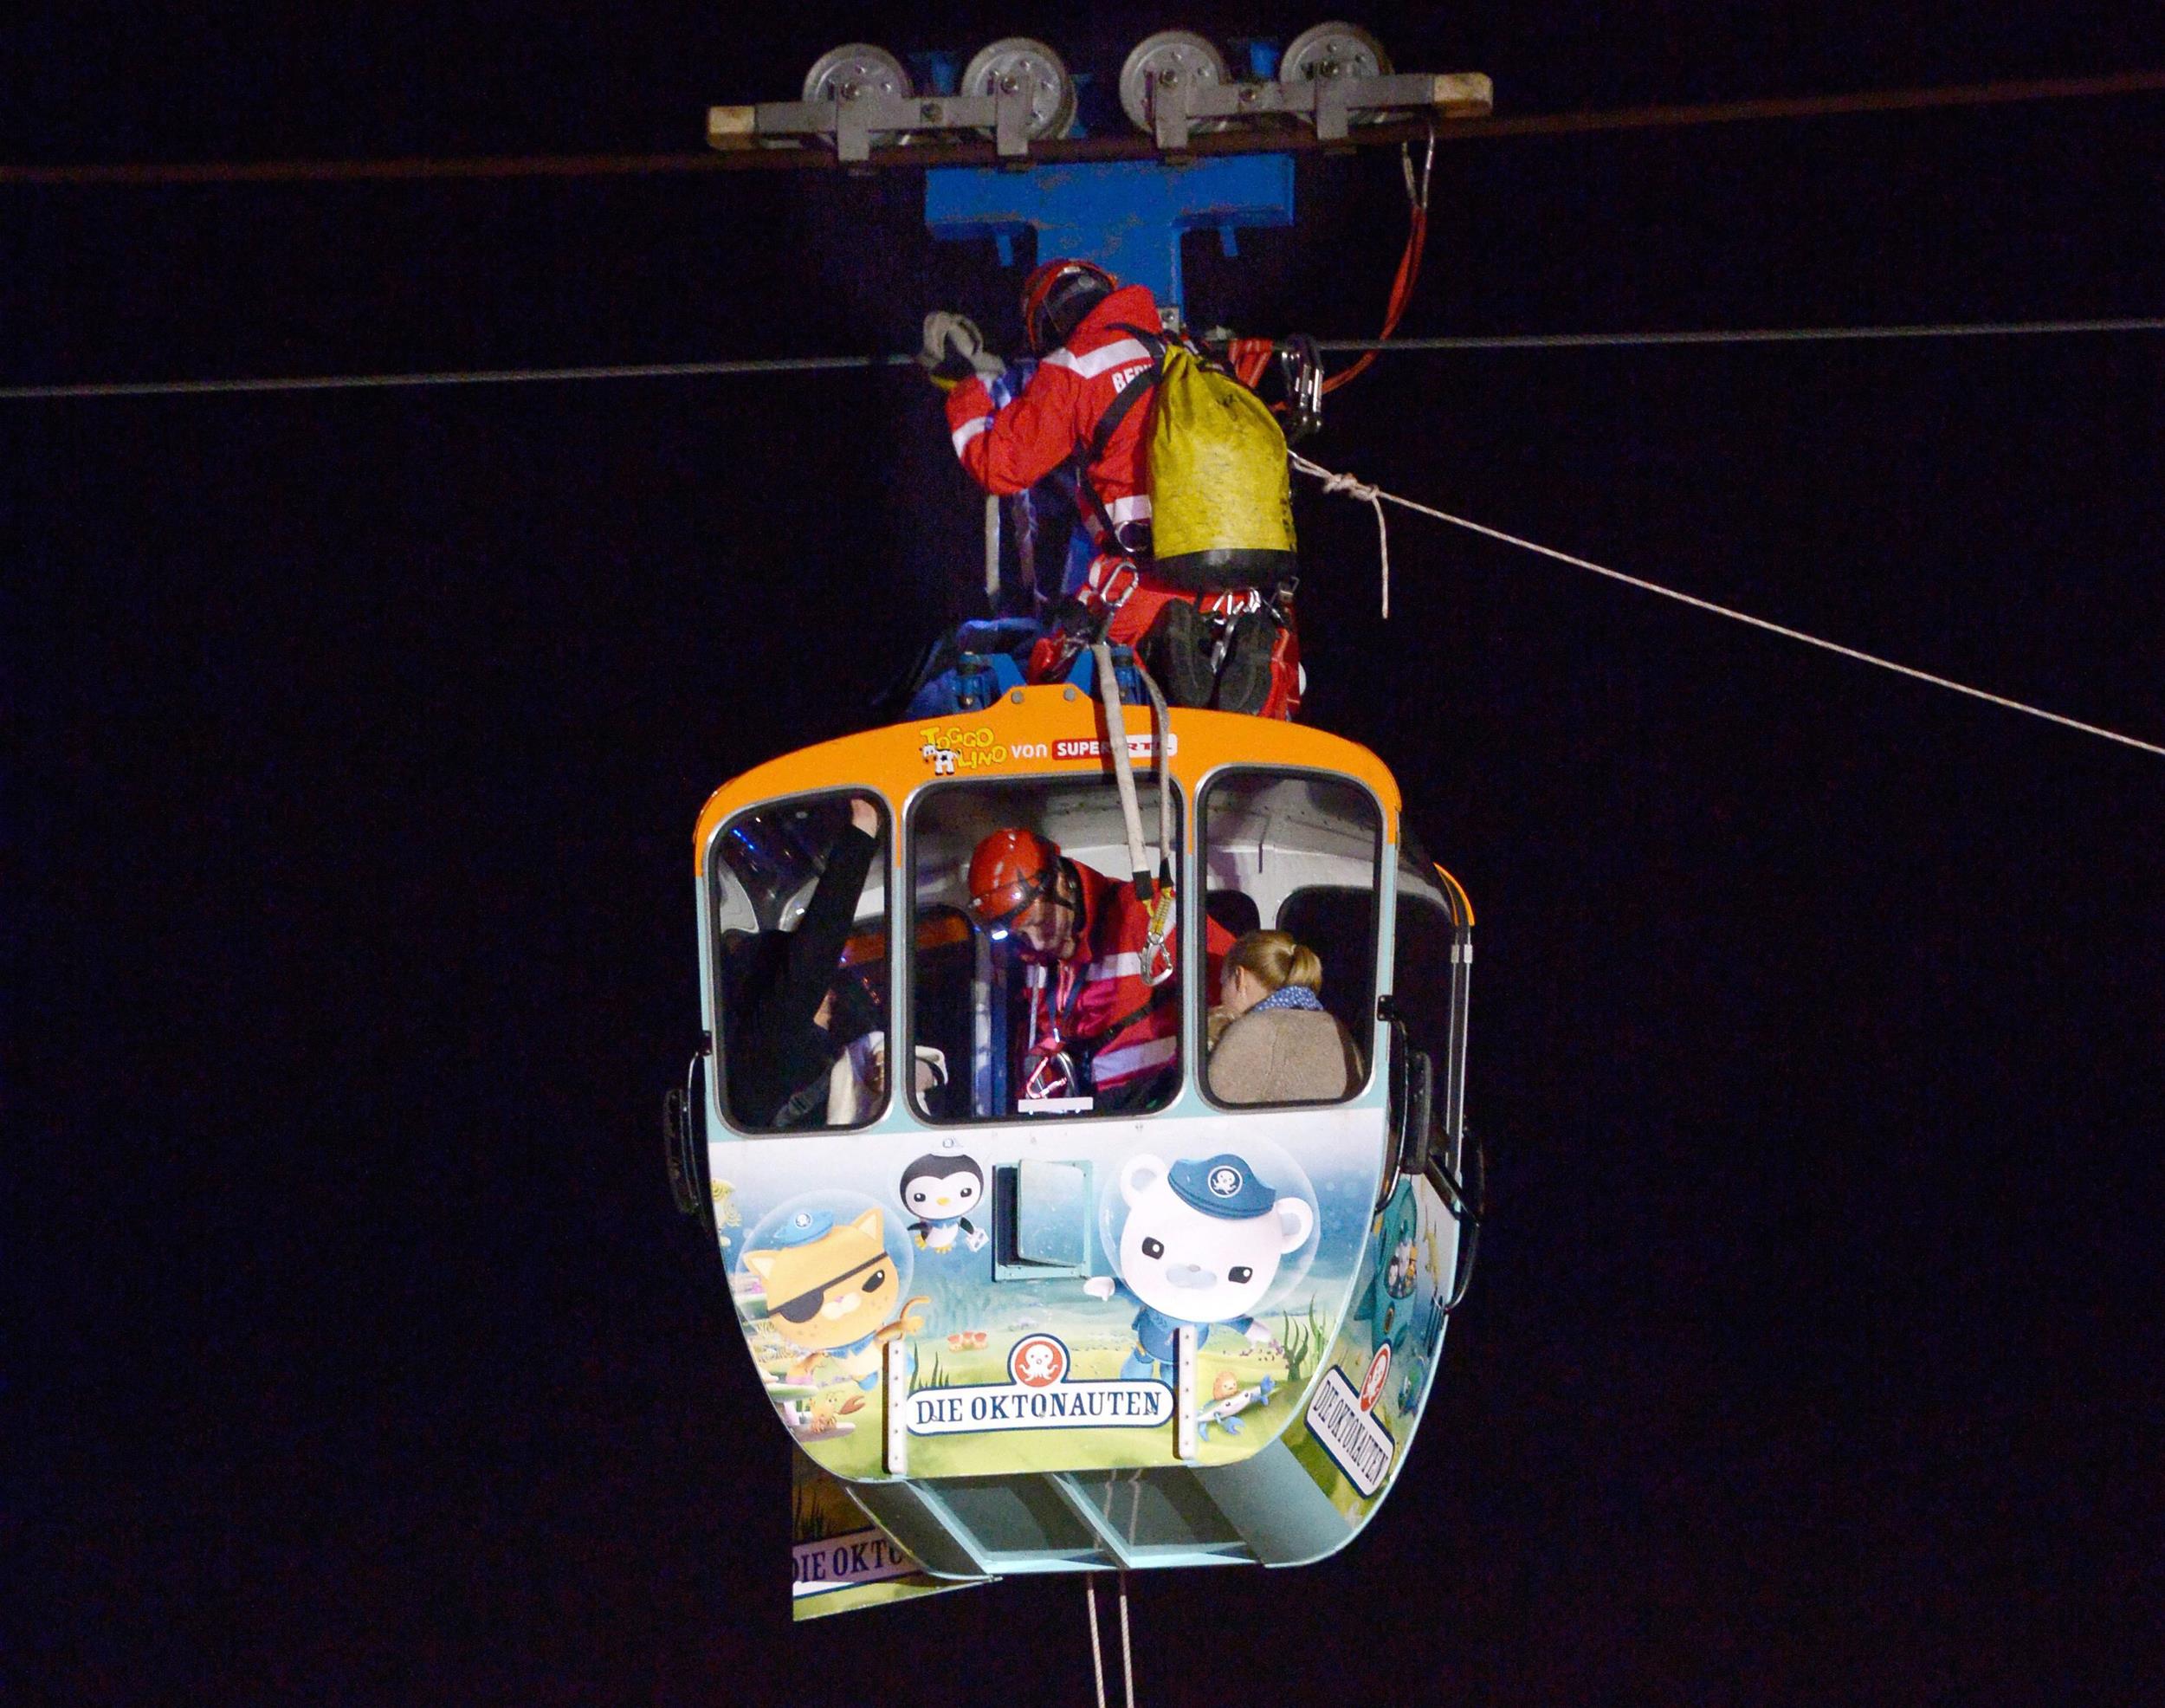 german-family-trapped-in-a-cable-car-rescued-after-hours